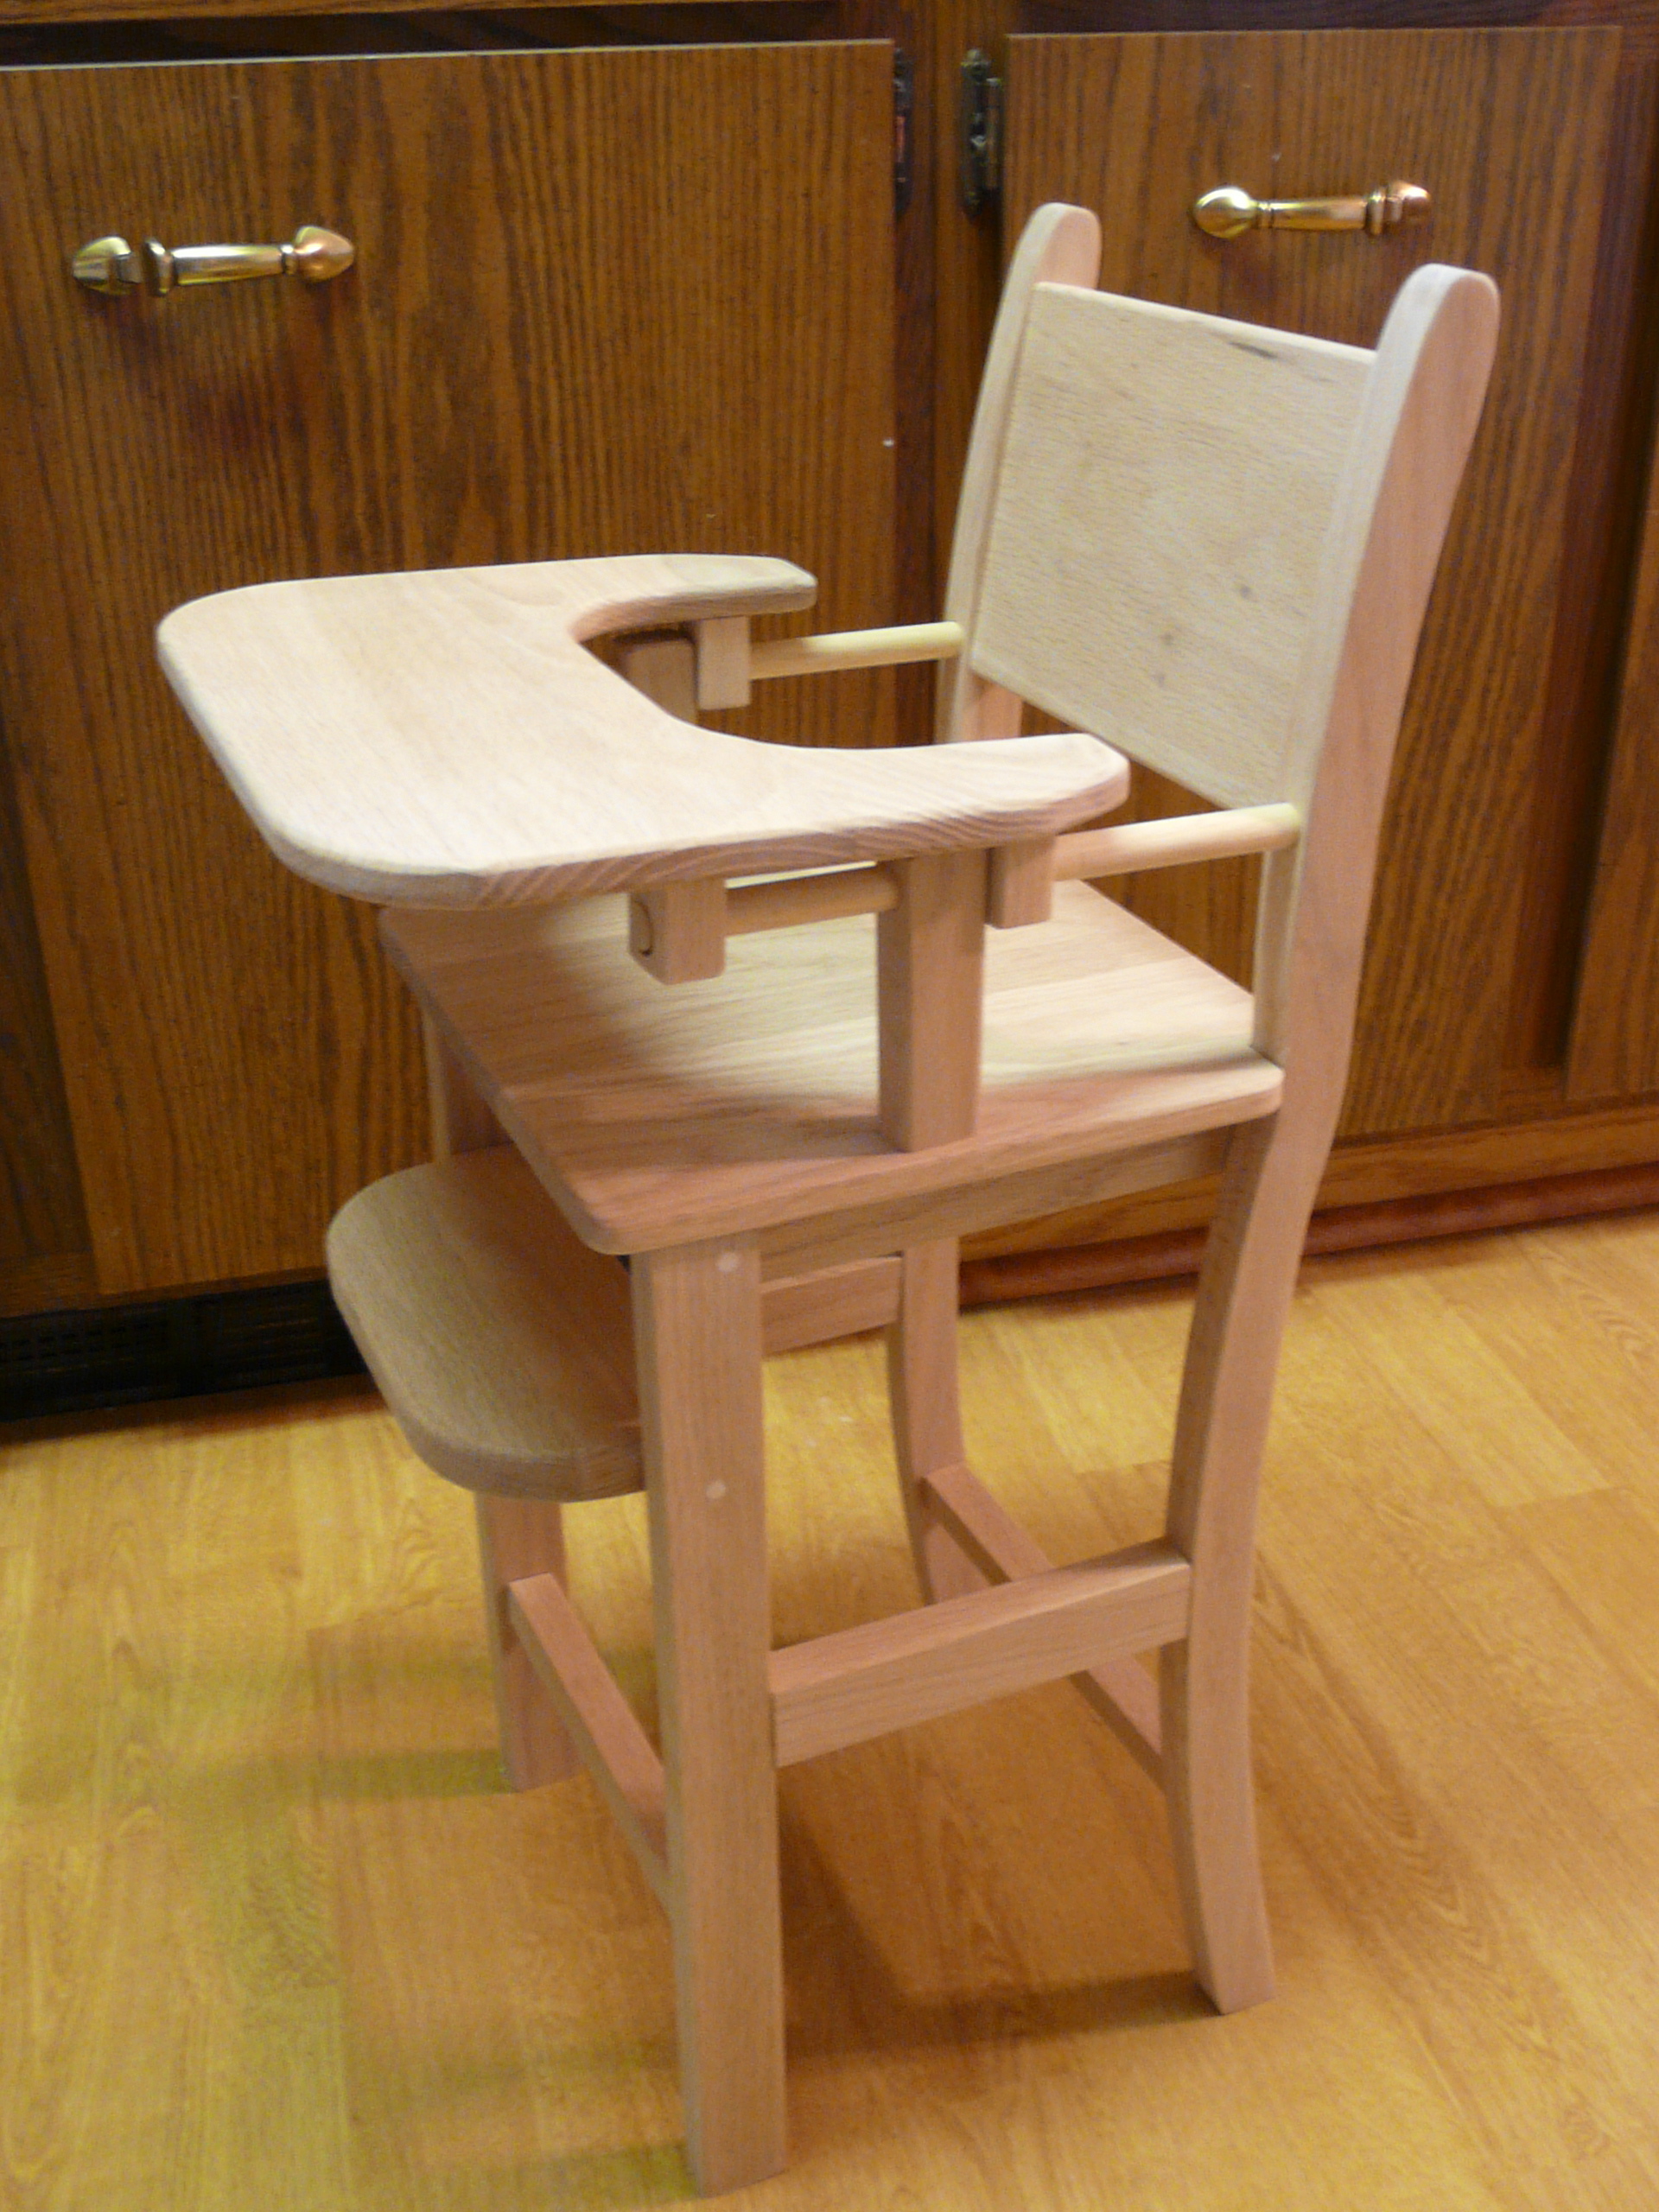 Wood Projects: doll high chair &amp; Welcome sign « Thoughts 